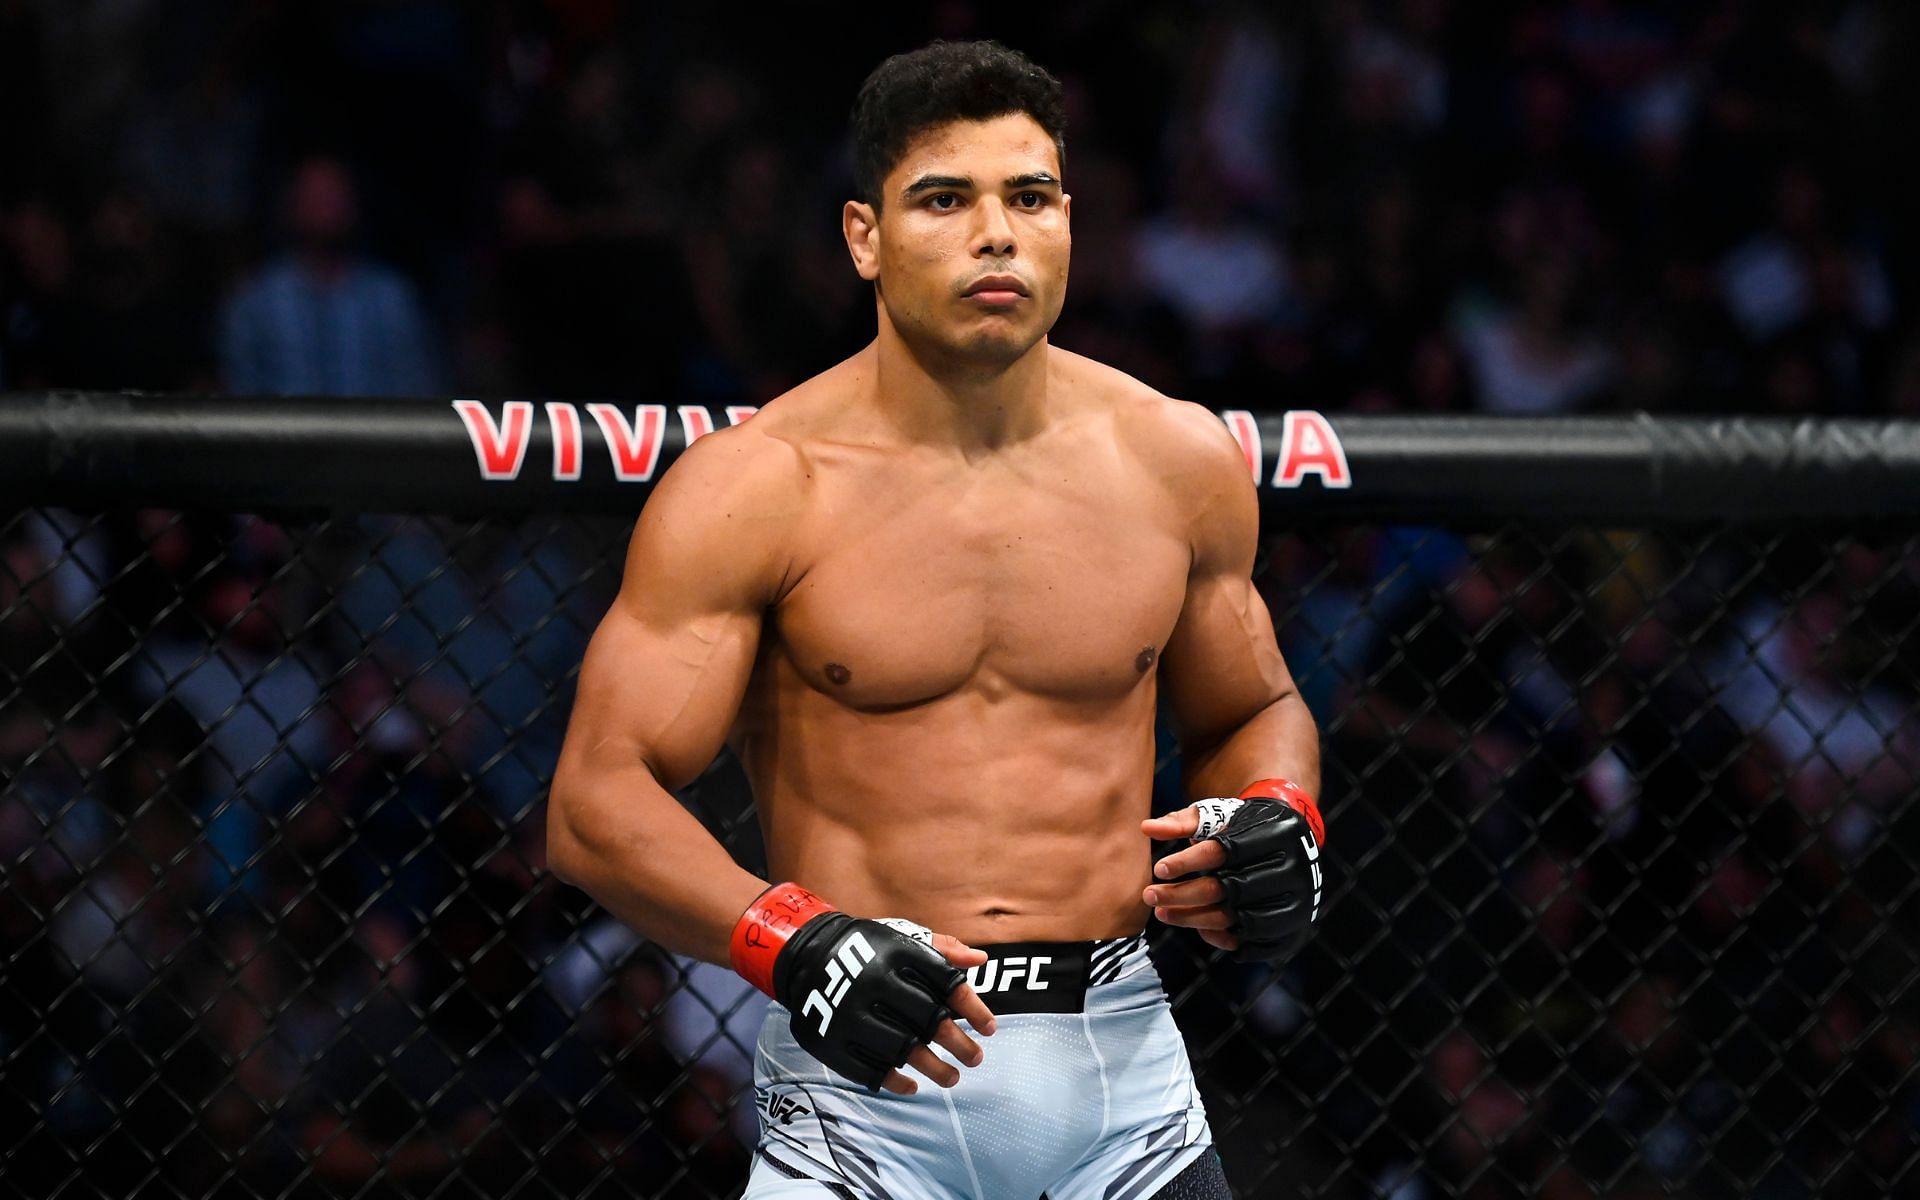 Paulo Costa is heralded as one of the most exciting UFC middleweights today [Image courtesy: Getty Images]